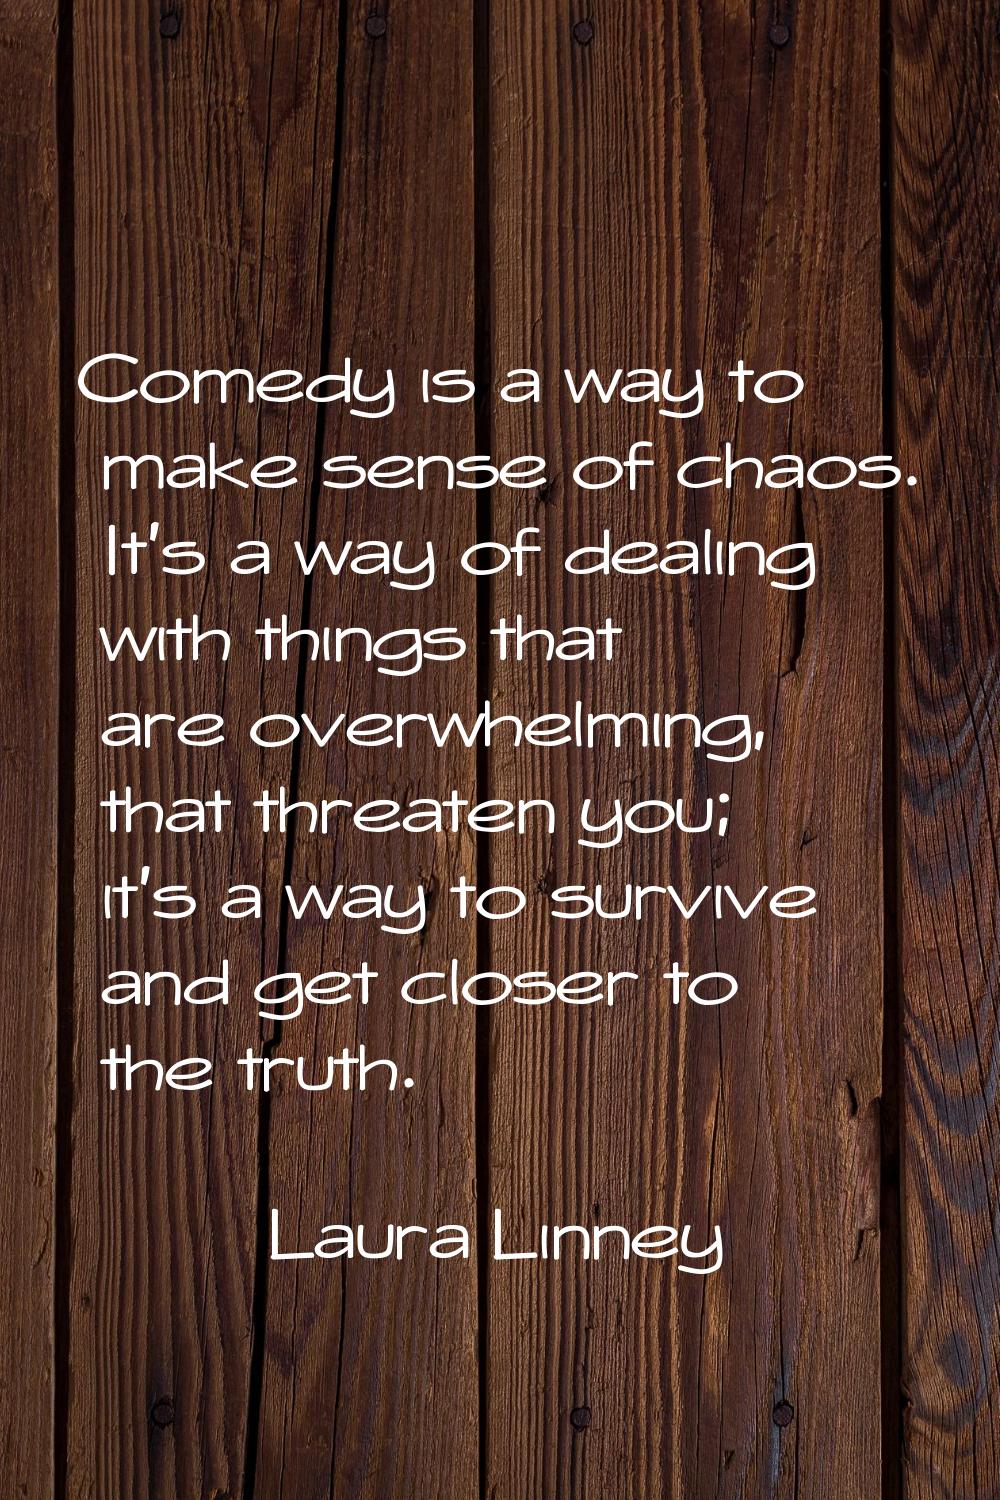 Comedy is a way to make sense of chaos. It's a way of dealing with things that are overwhelming, th